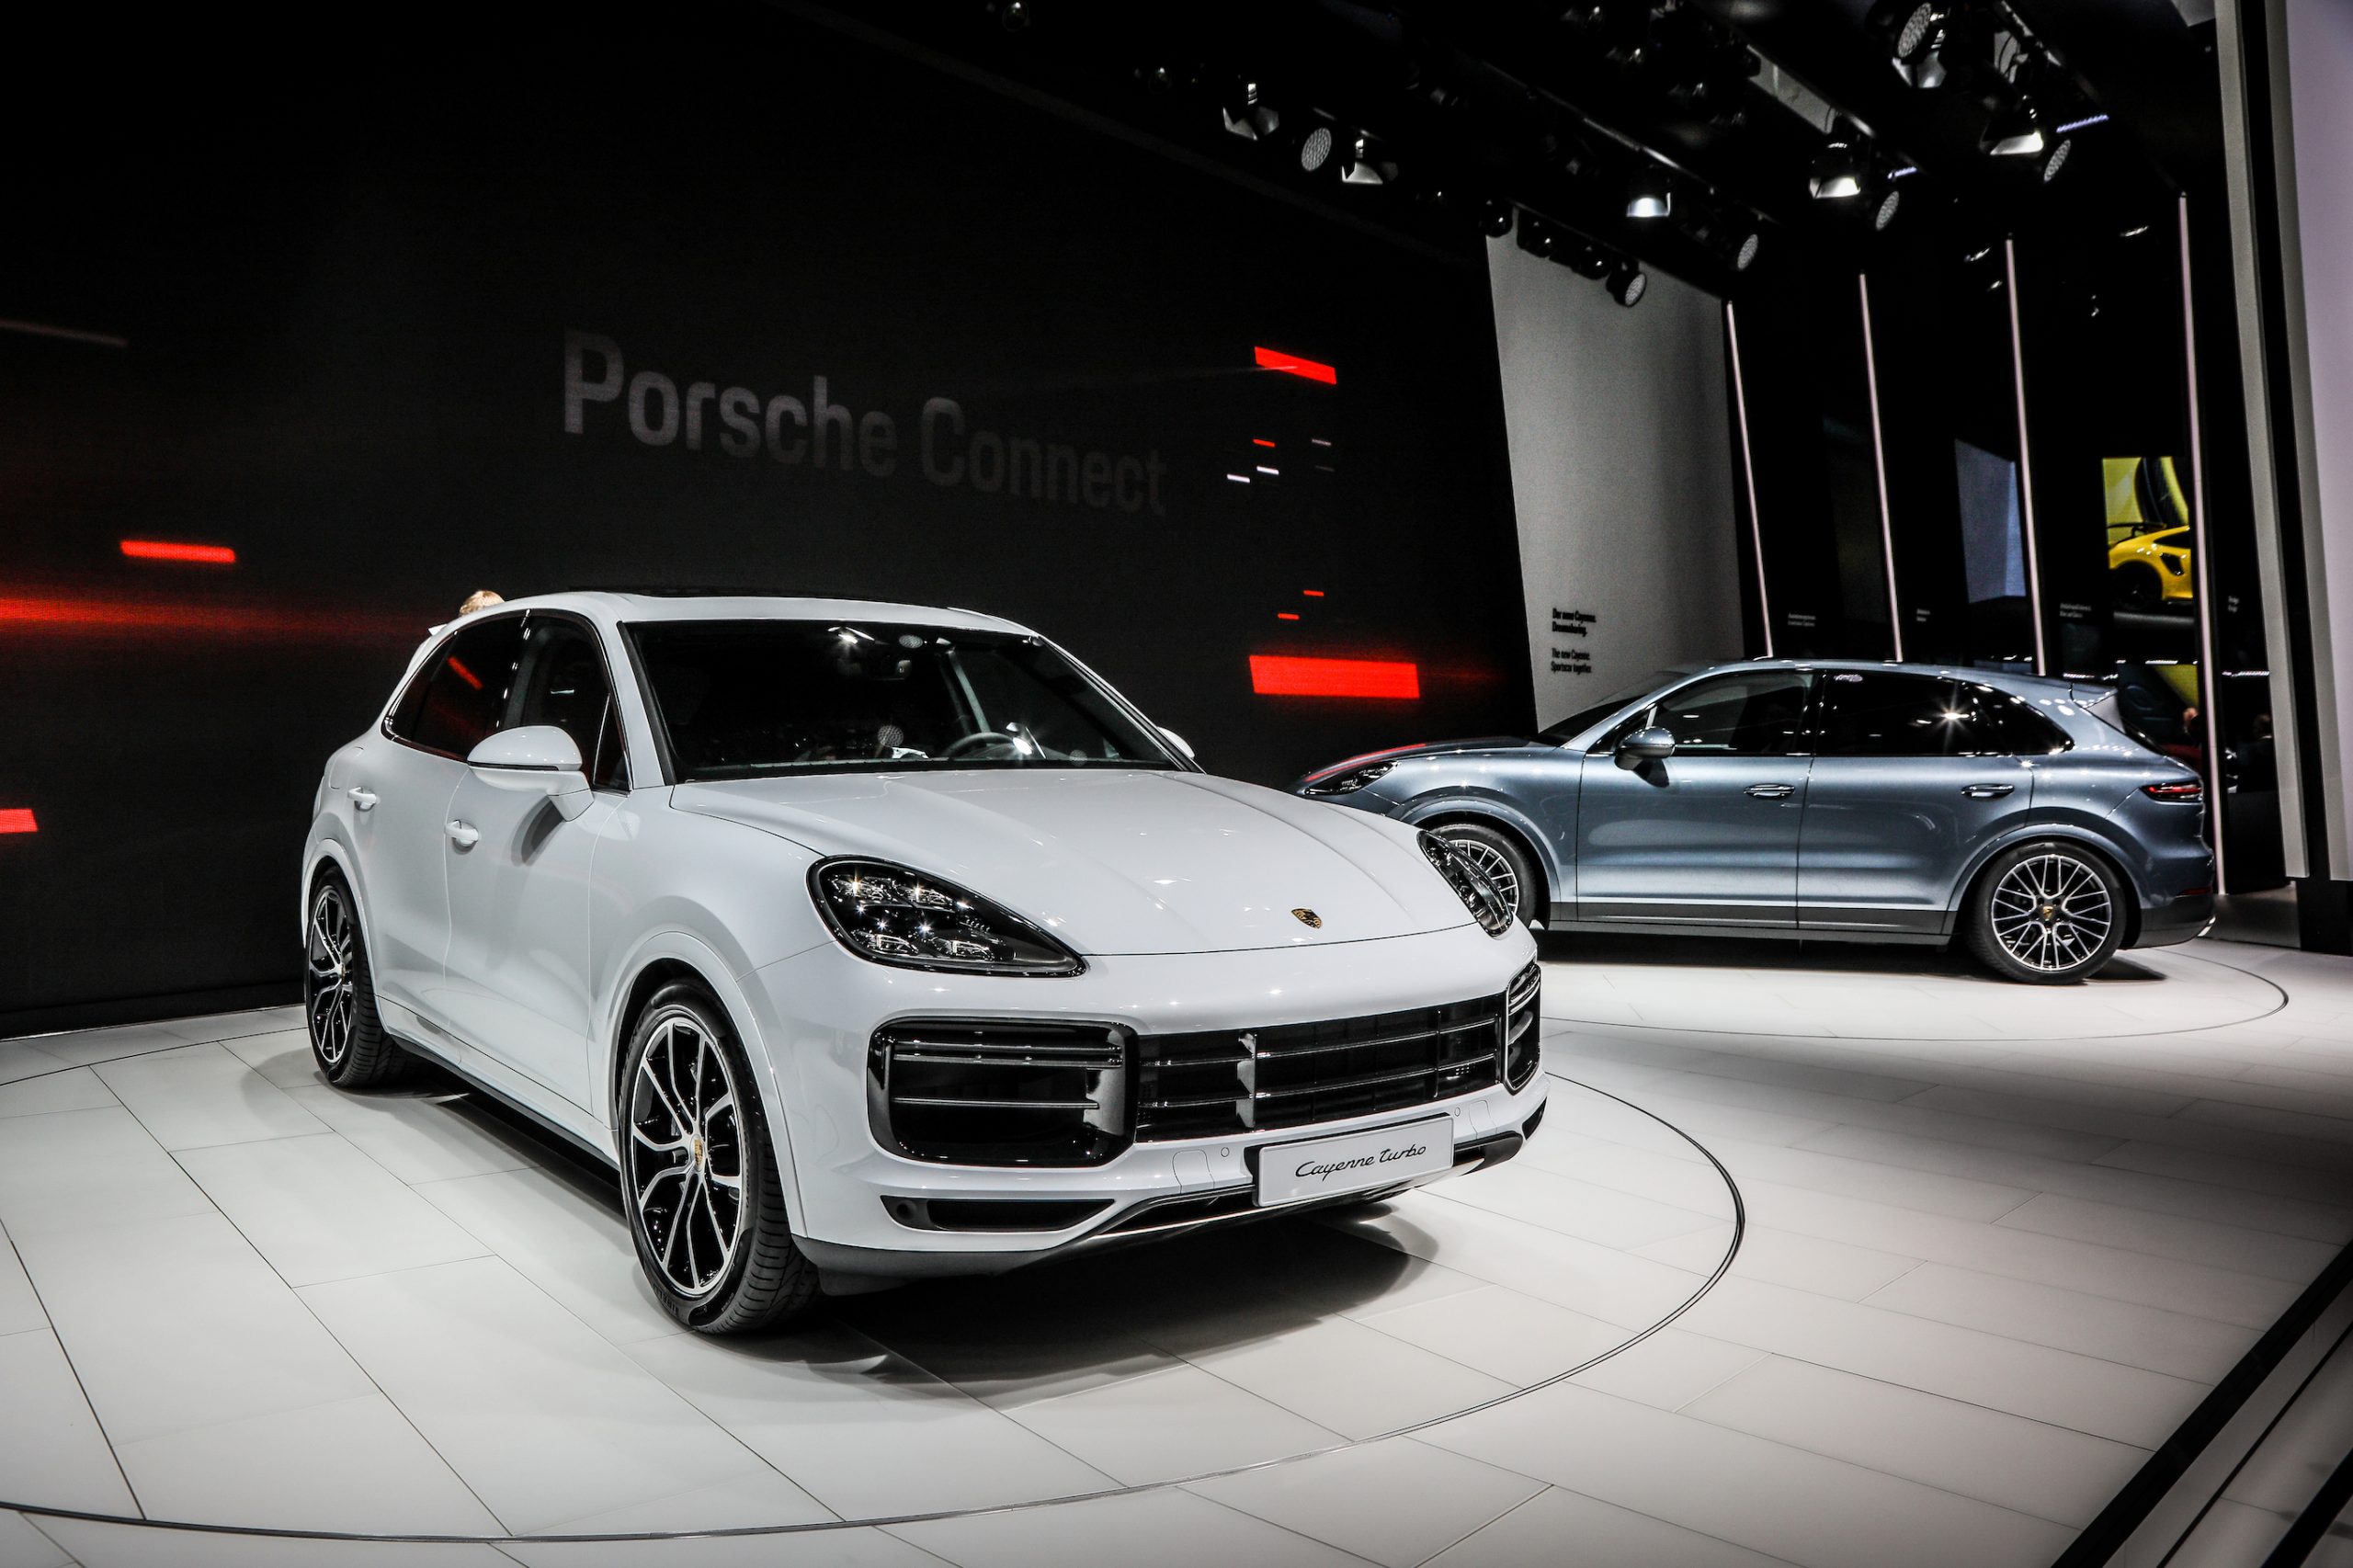 The Porsche Cayenne Turbo, rival to the Mercedes-AMG GLE 63 S, on display at the 2017 Frankfurt Auto Show